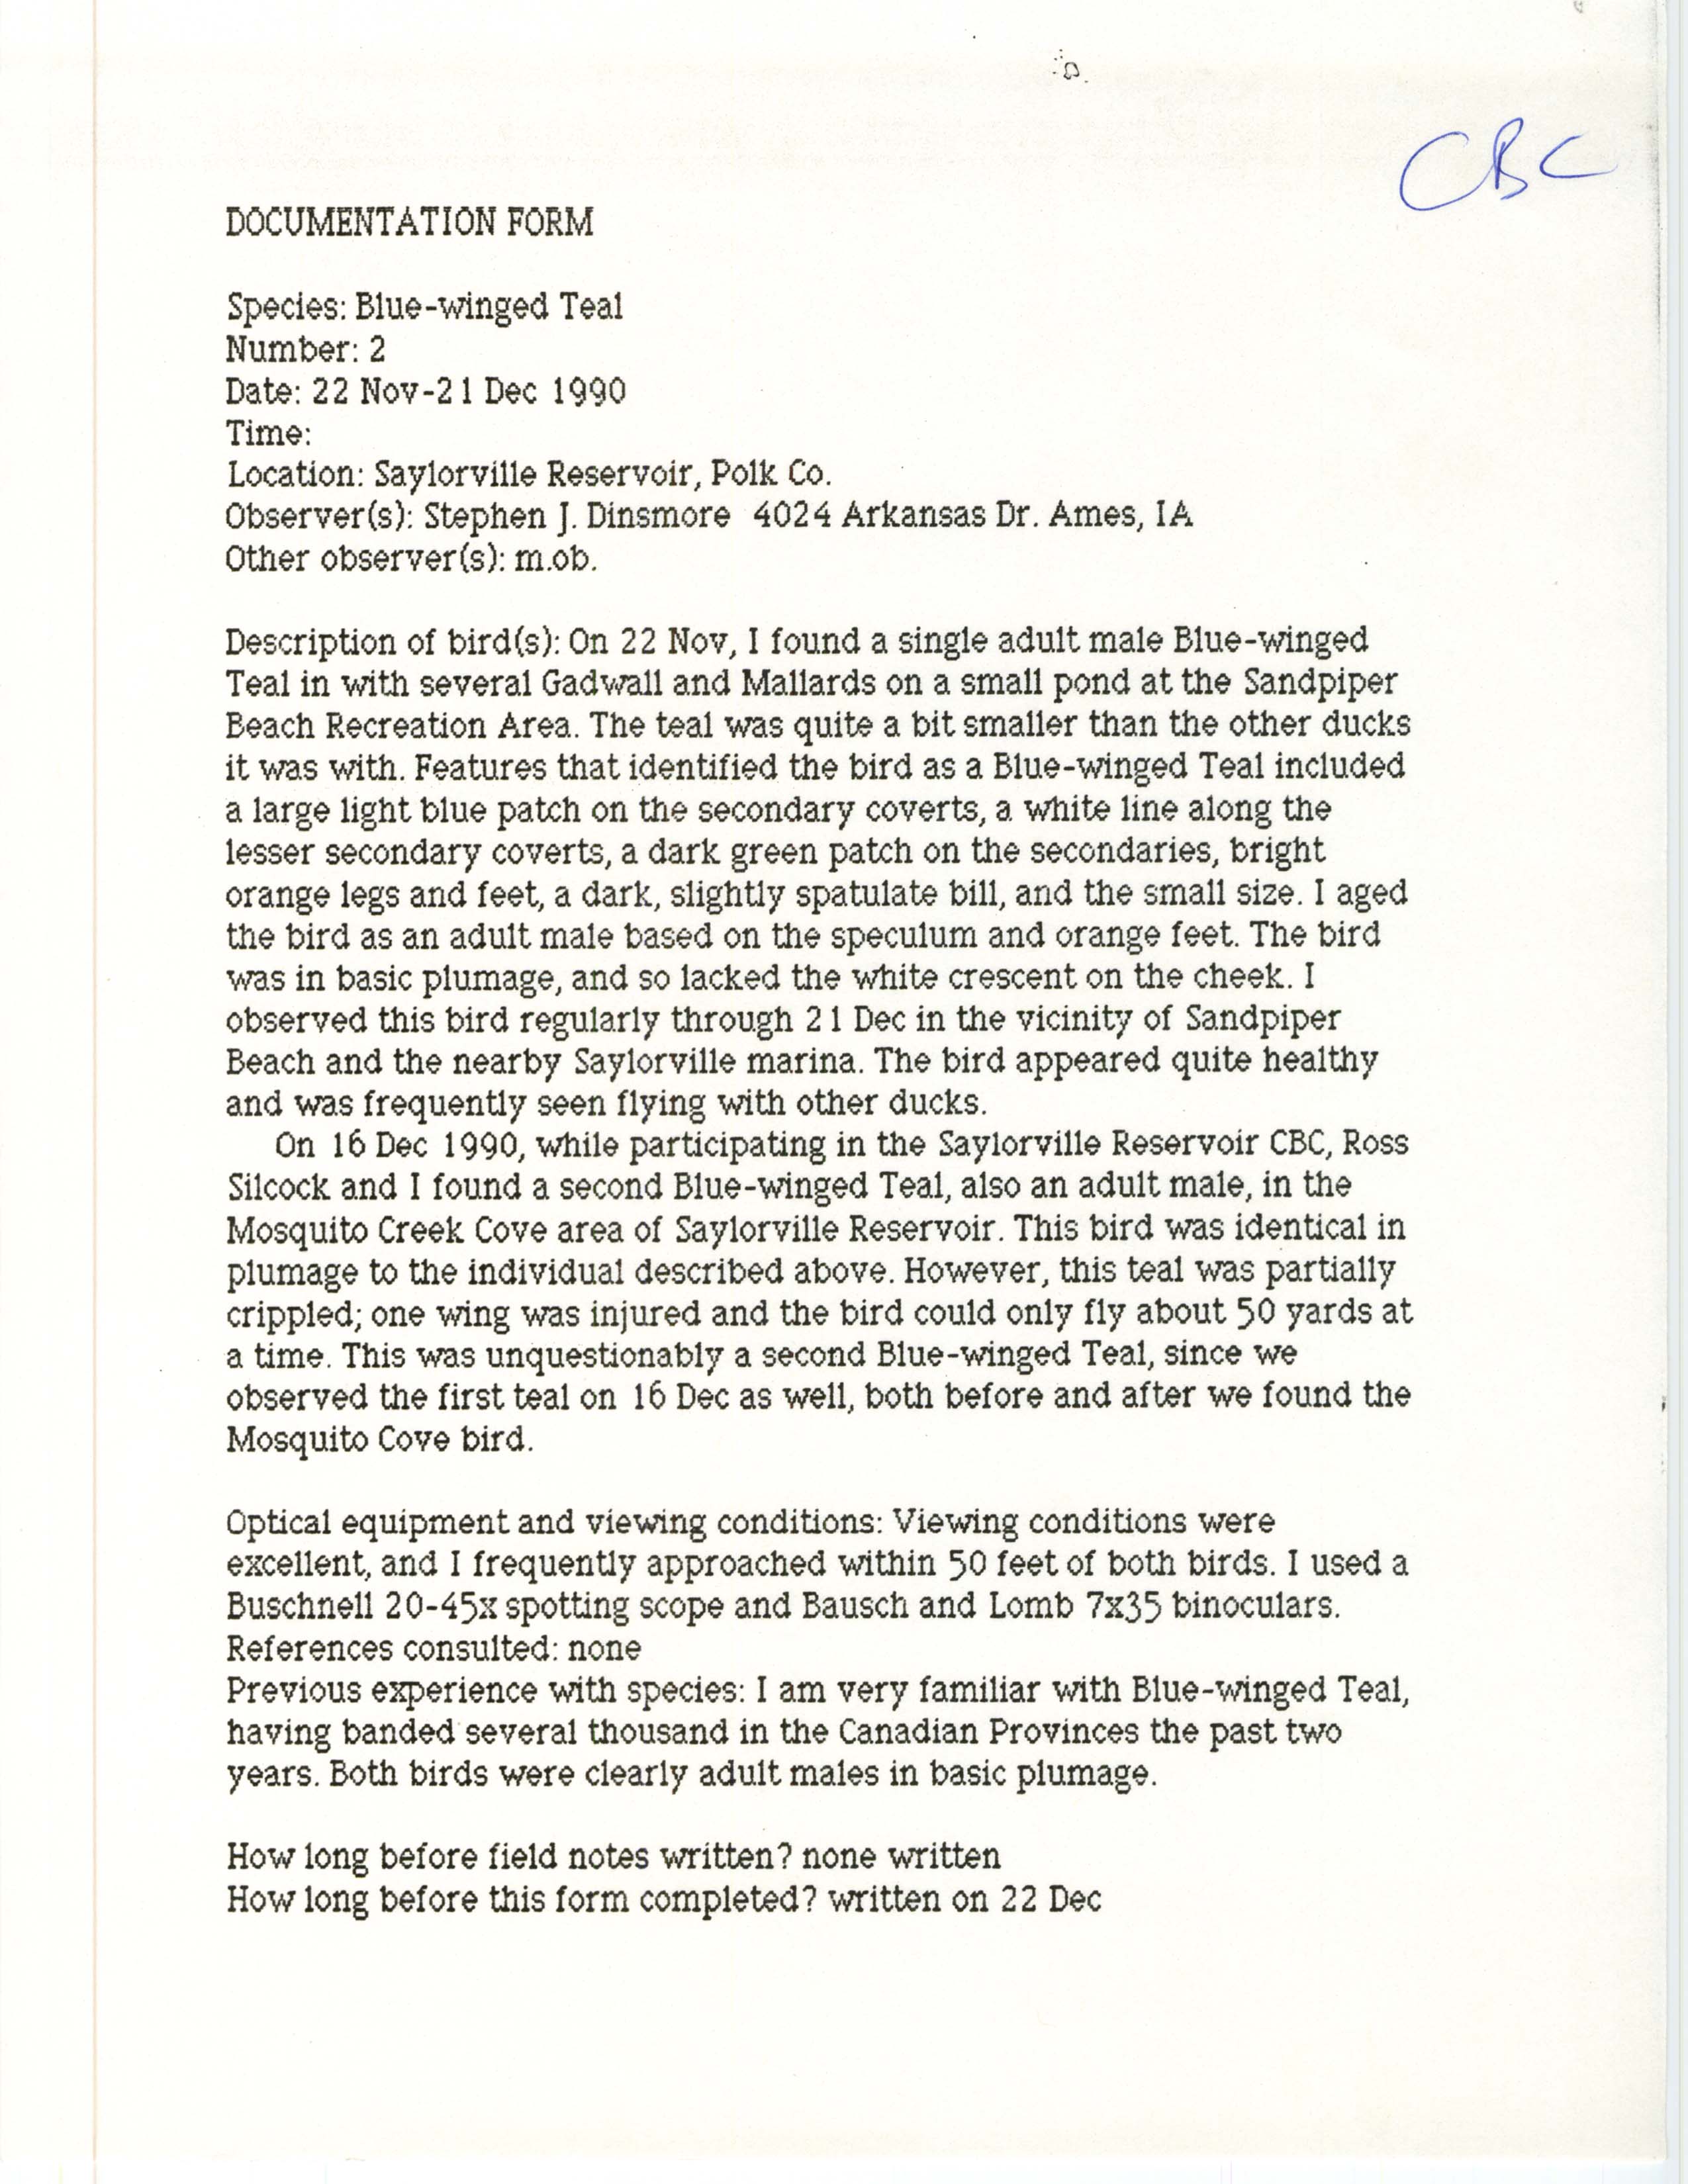 Rare bird documentation form for Blue-winged Teal at Saylorville Reservoir in 1990